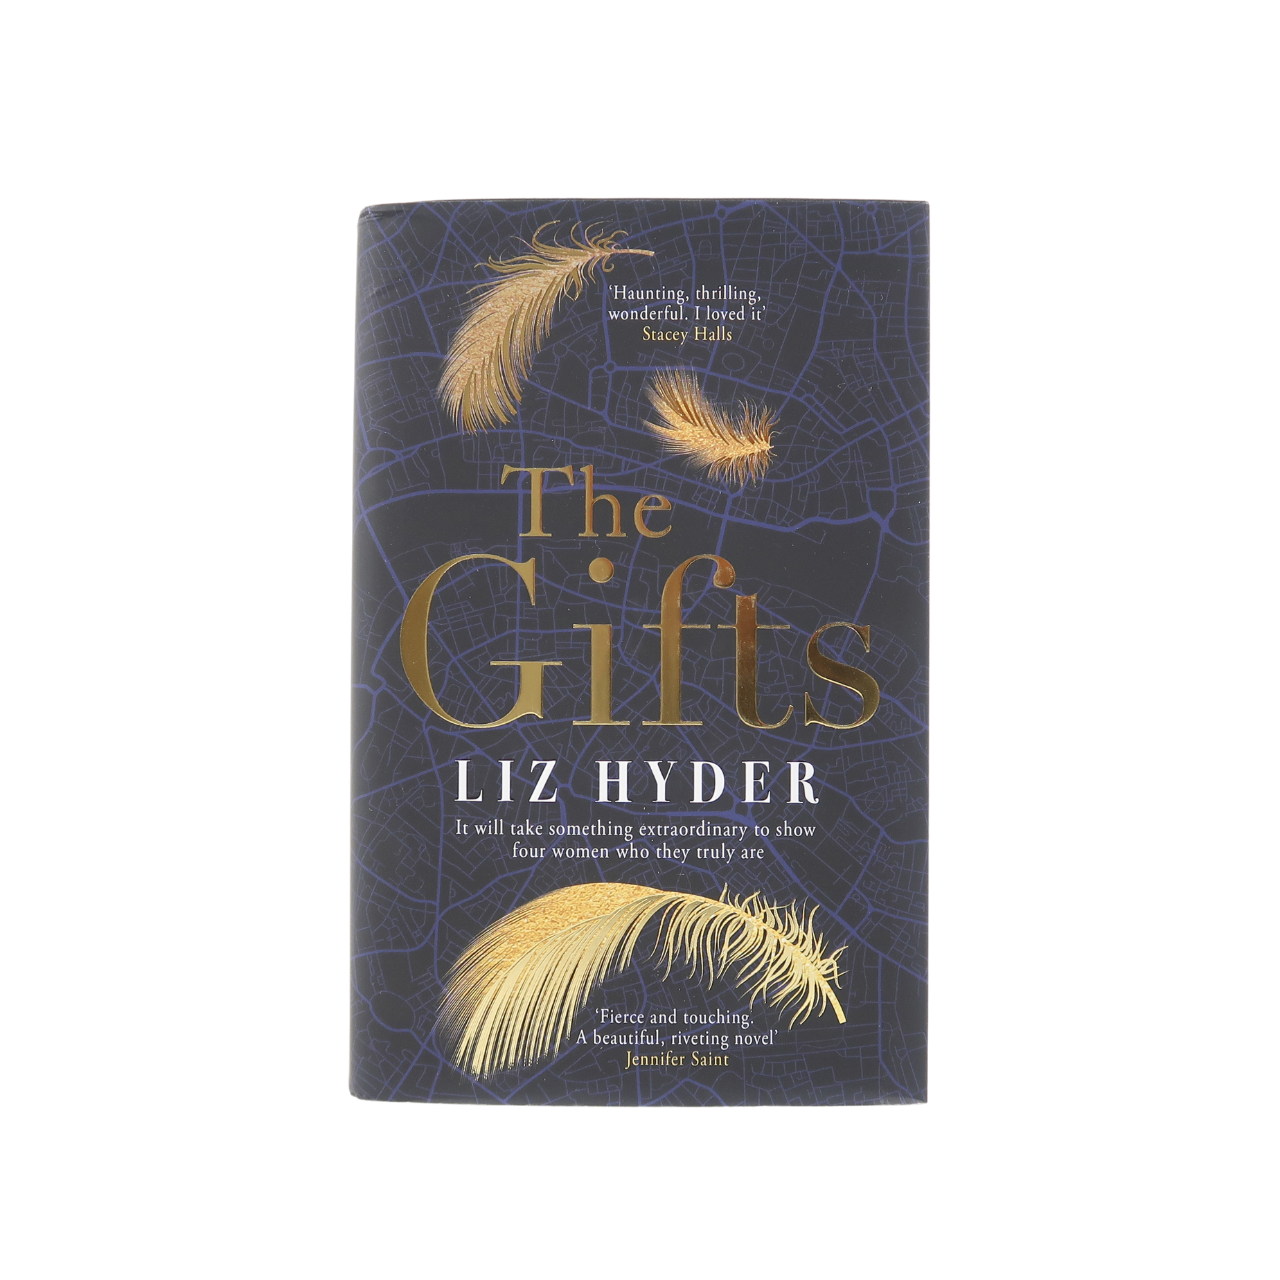 Bonnier Publishing The Gifts - Liz Hyder  and Bookmark - Signed Copies